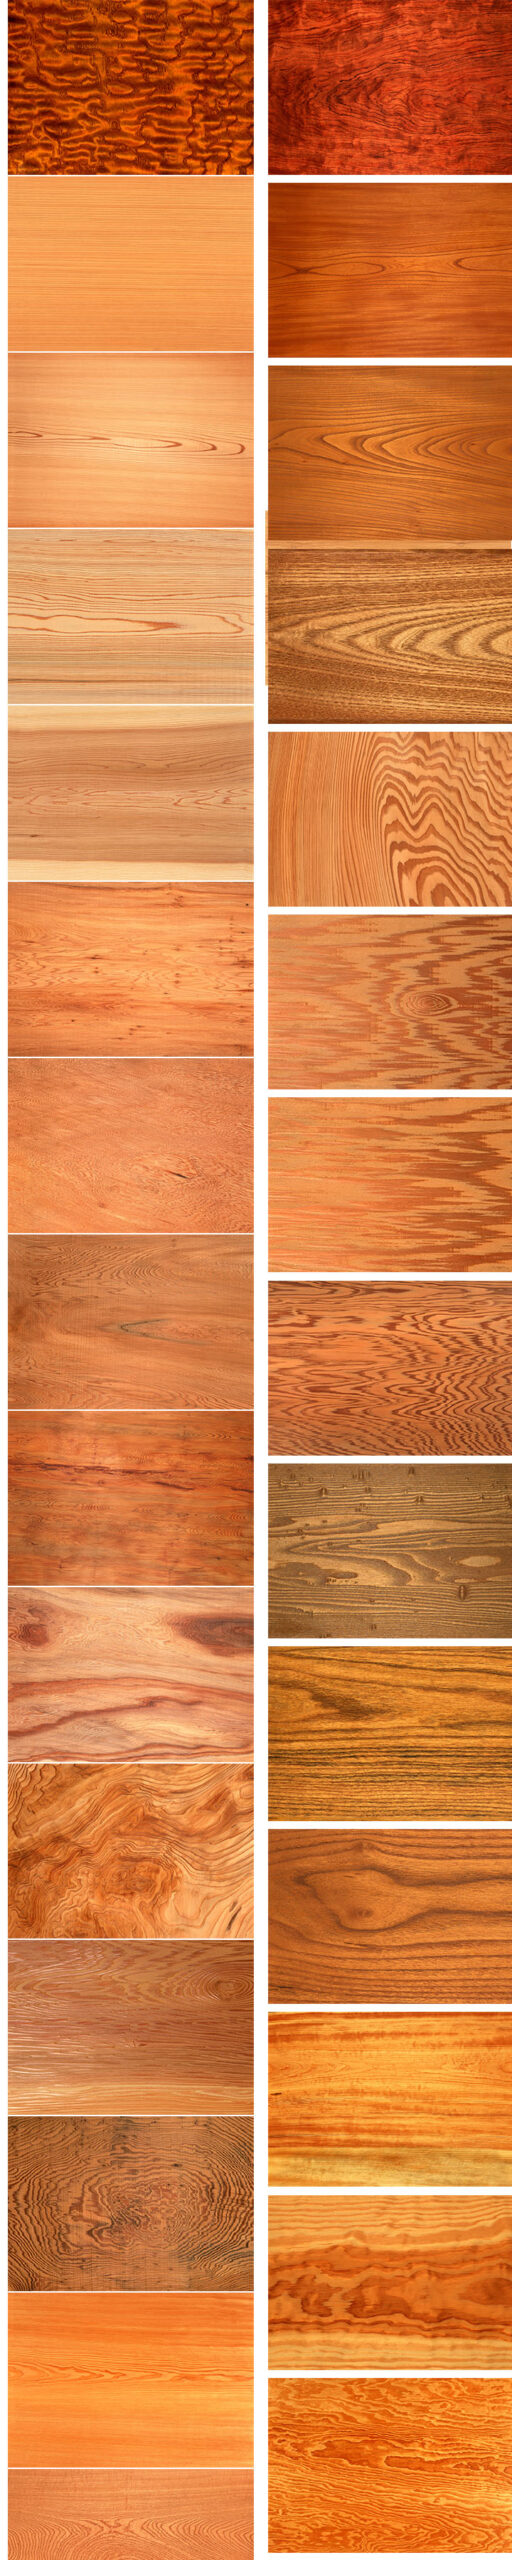 315+ Wooden Texture Full HD Free Download 2023 Pack- Trending